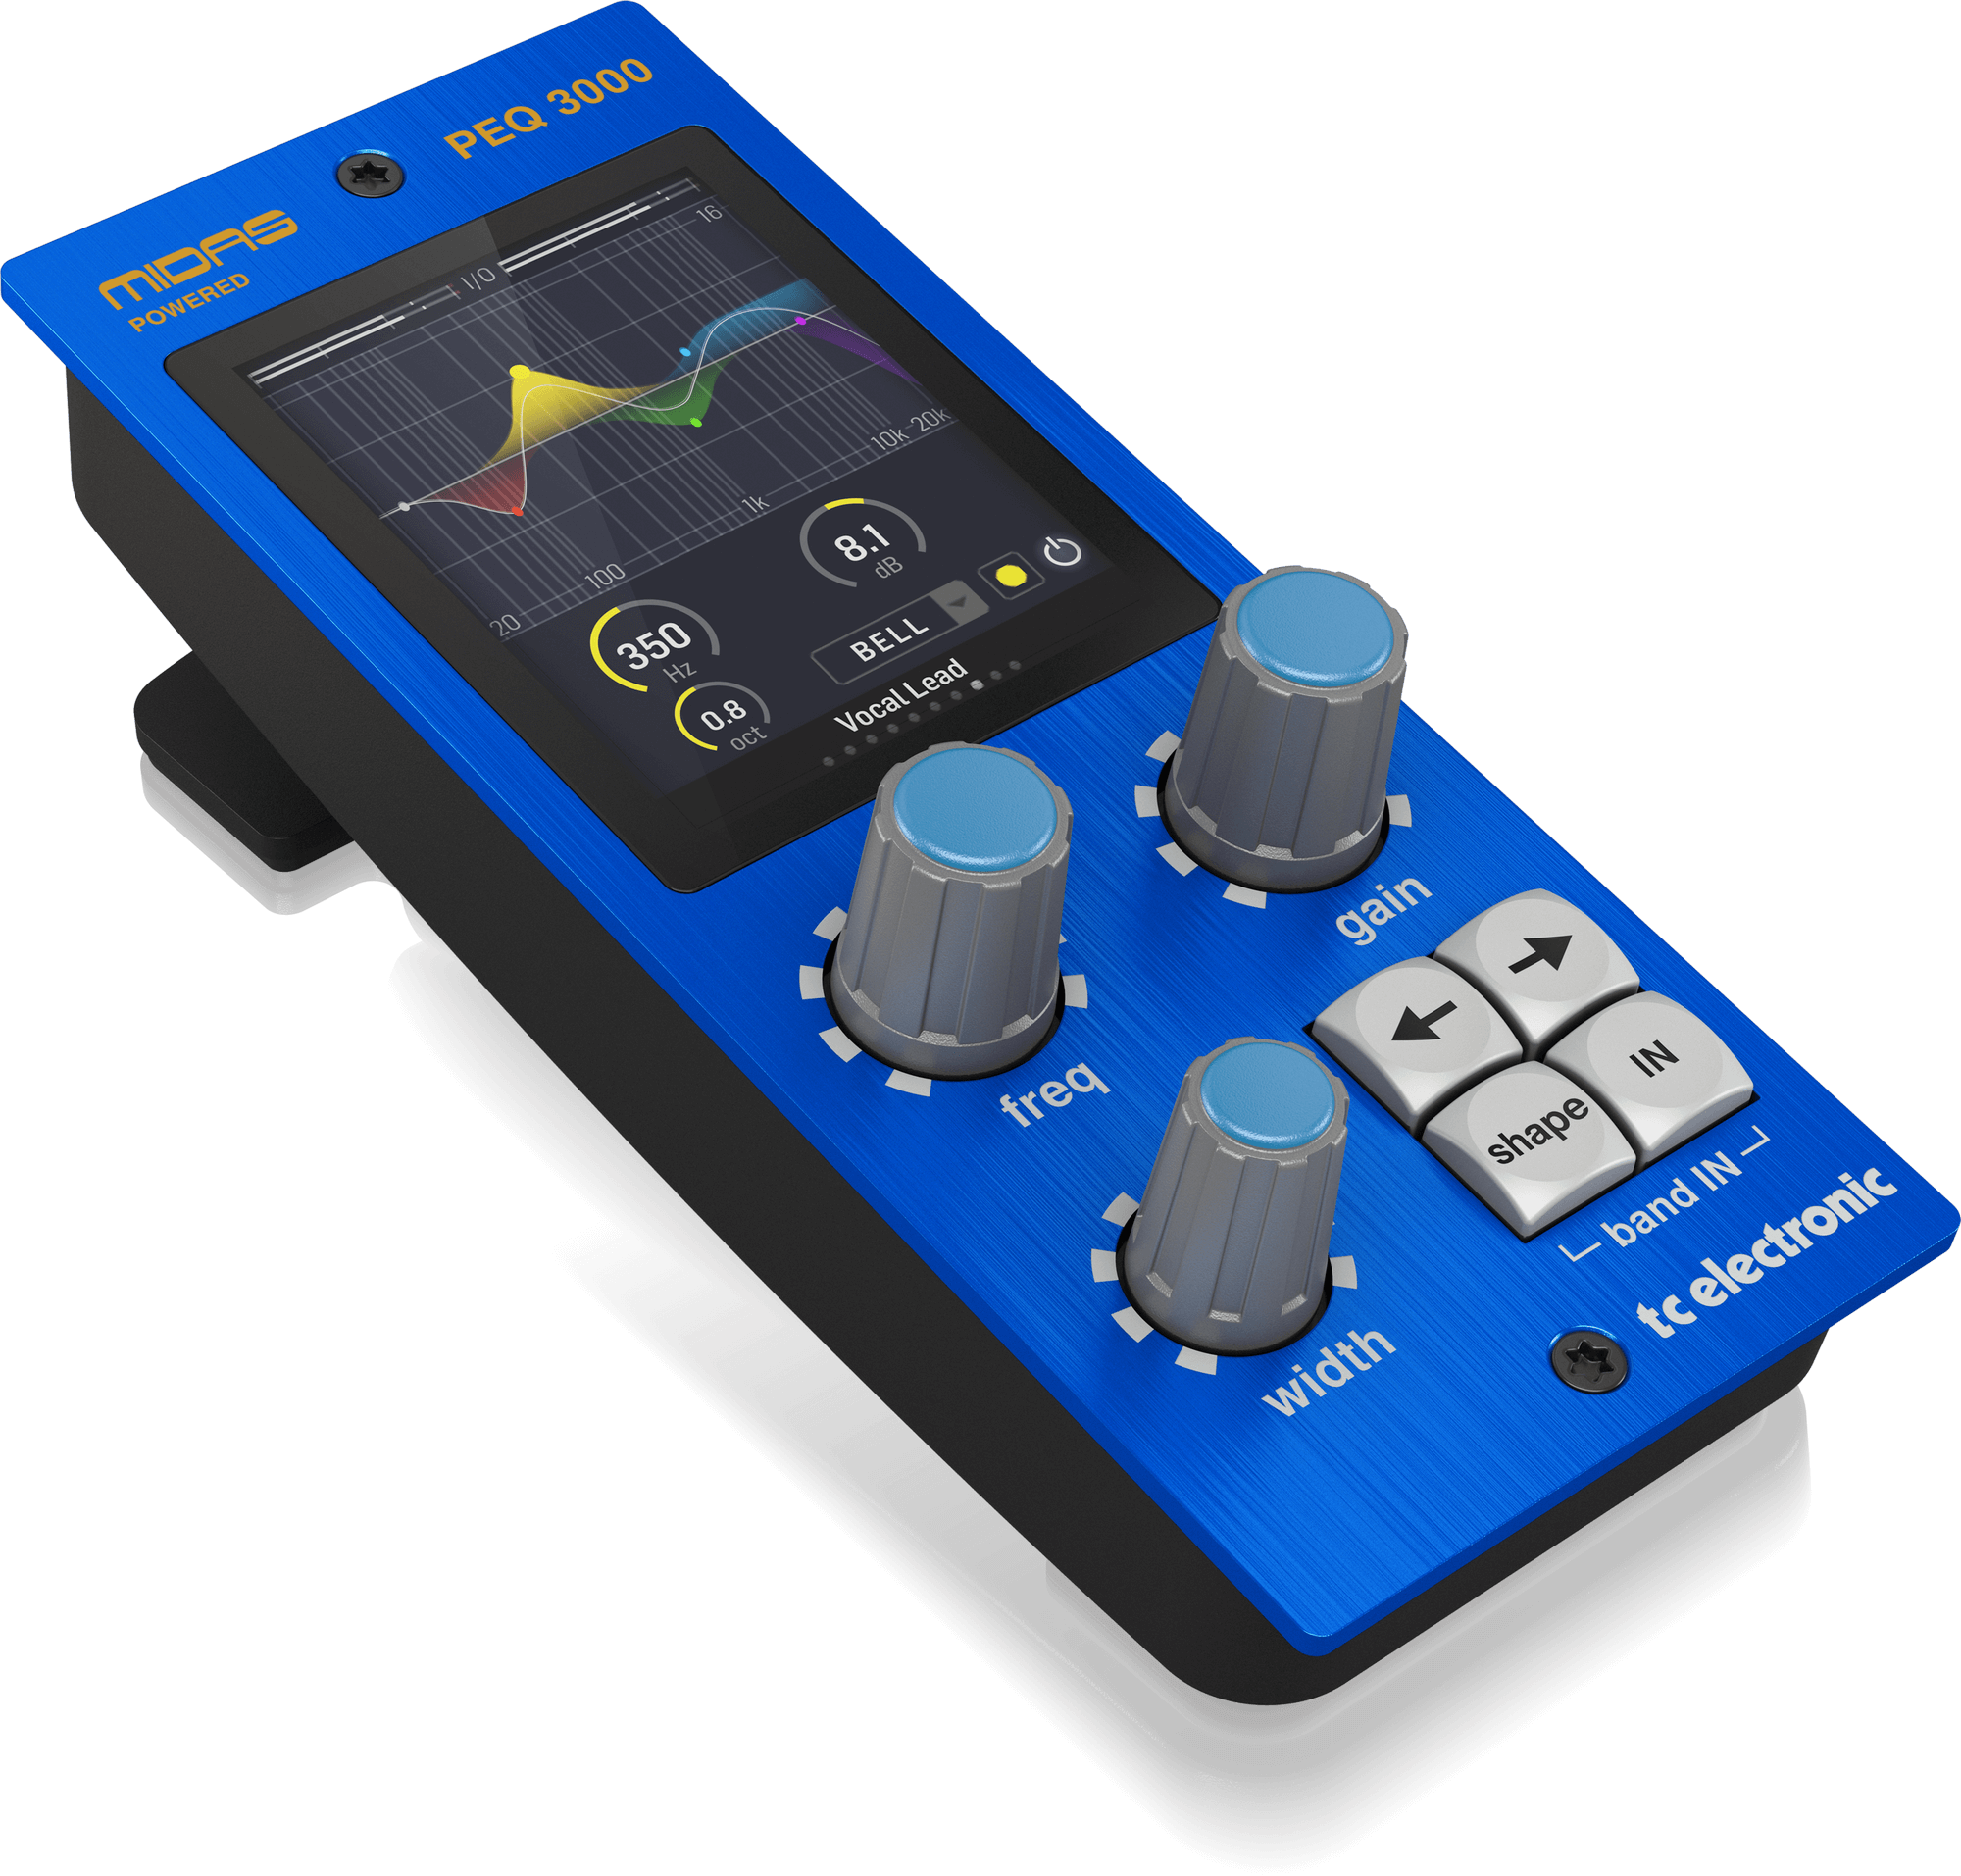 TC Electronic Midas-powered Parametric Channel Eq Plug-in With Optional Analog-feel Desktop Interface, TC ELECTRONIC, AUDIO PROCESSOR, tc-electronic-audio-processor-tc-peq-3000-dt, ZOSO MUSIC SDN BHD